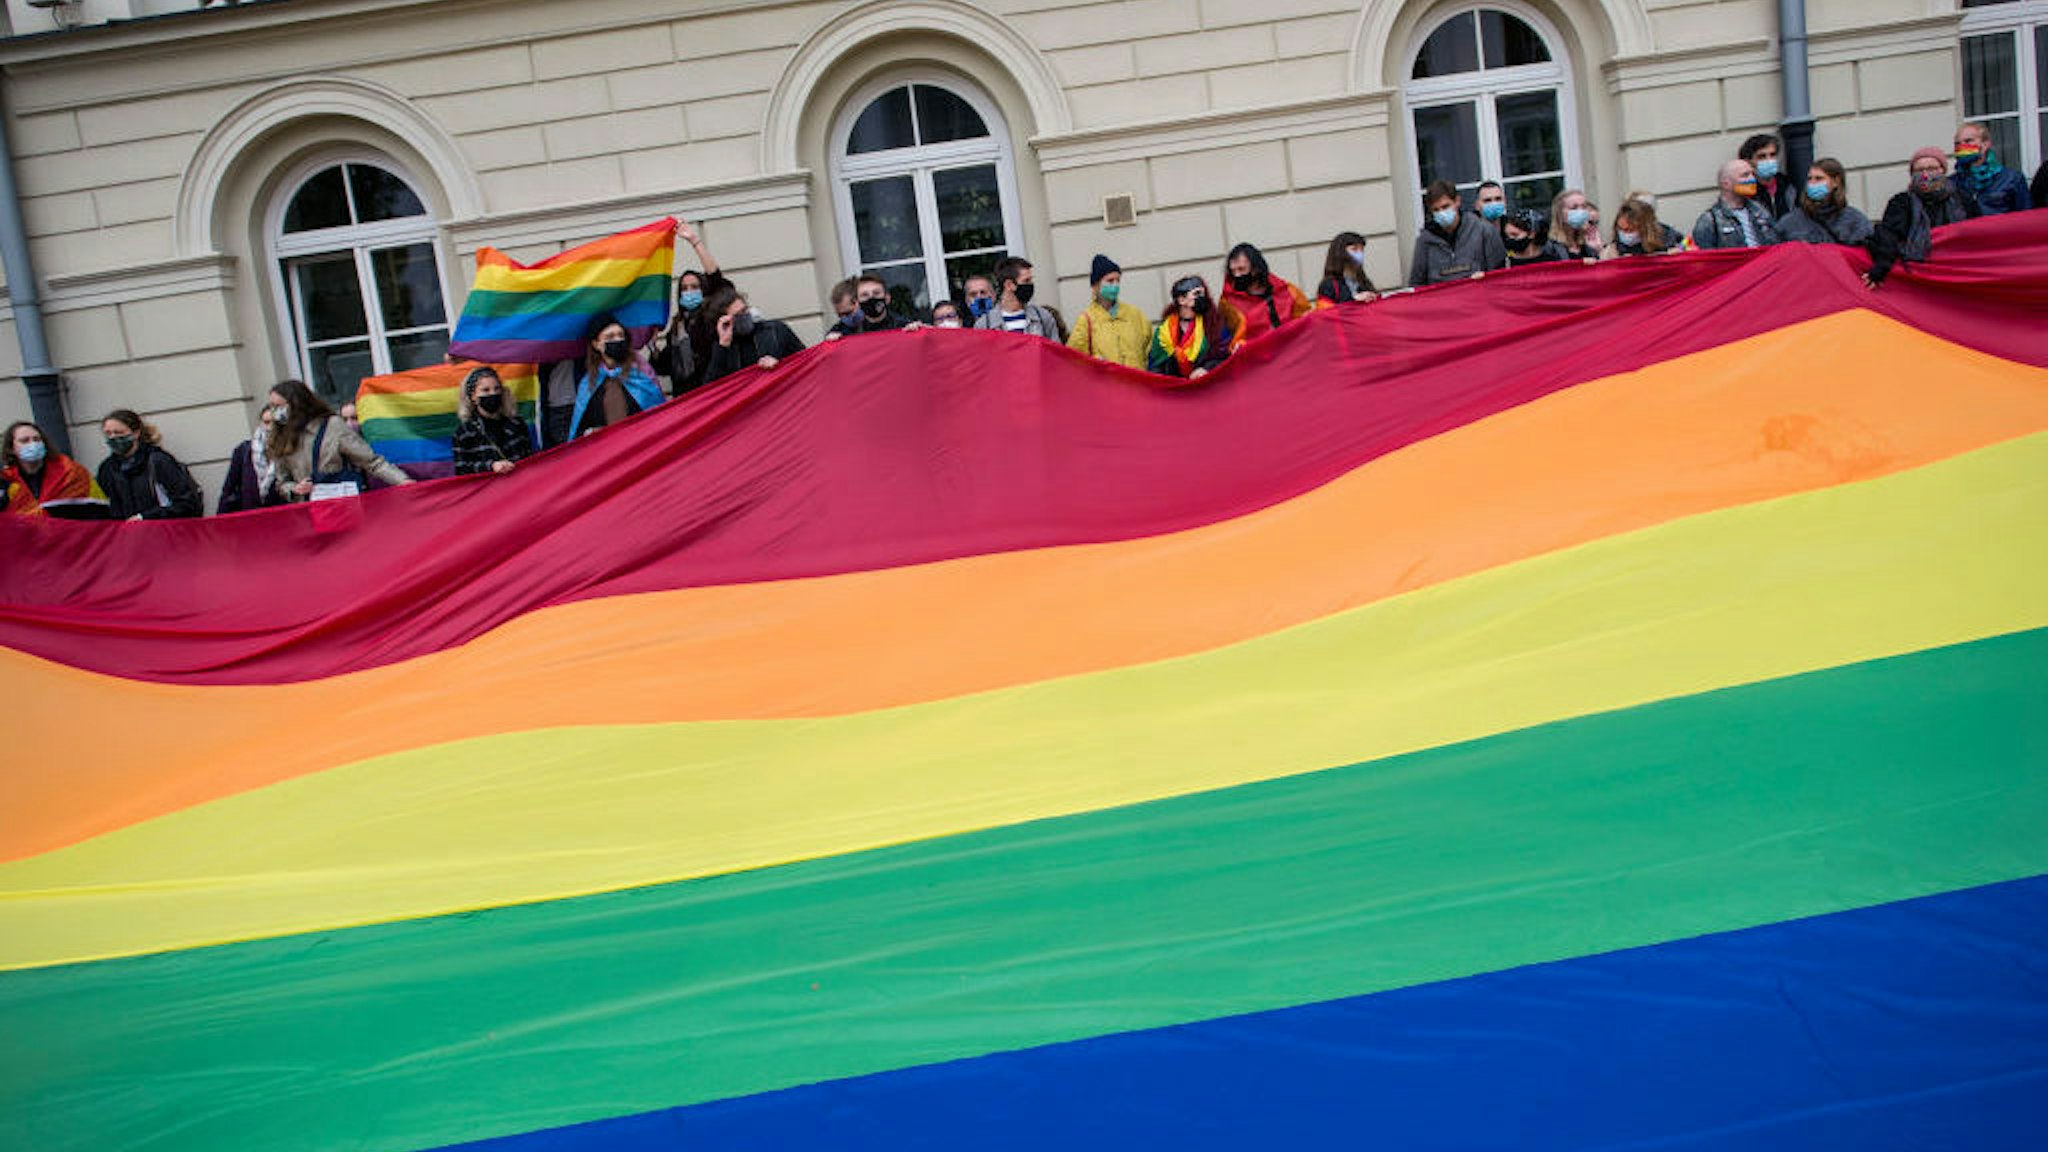 WARSAW, POLAND - 2020/10/01: Activists hold a massive rainbow flag at the university campus during the protest.